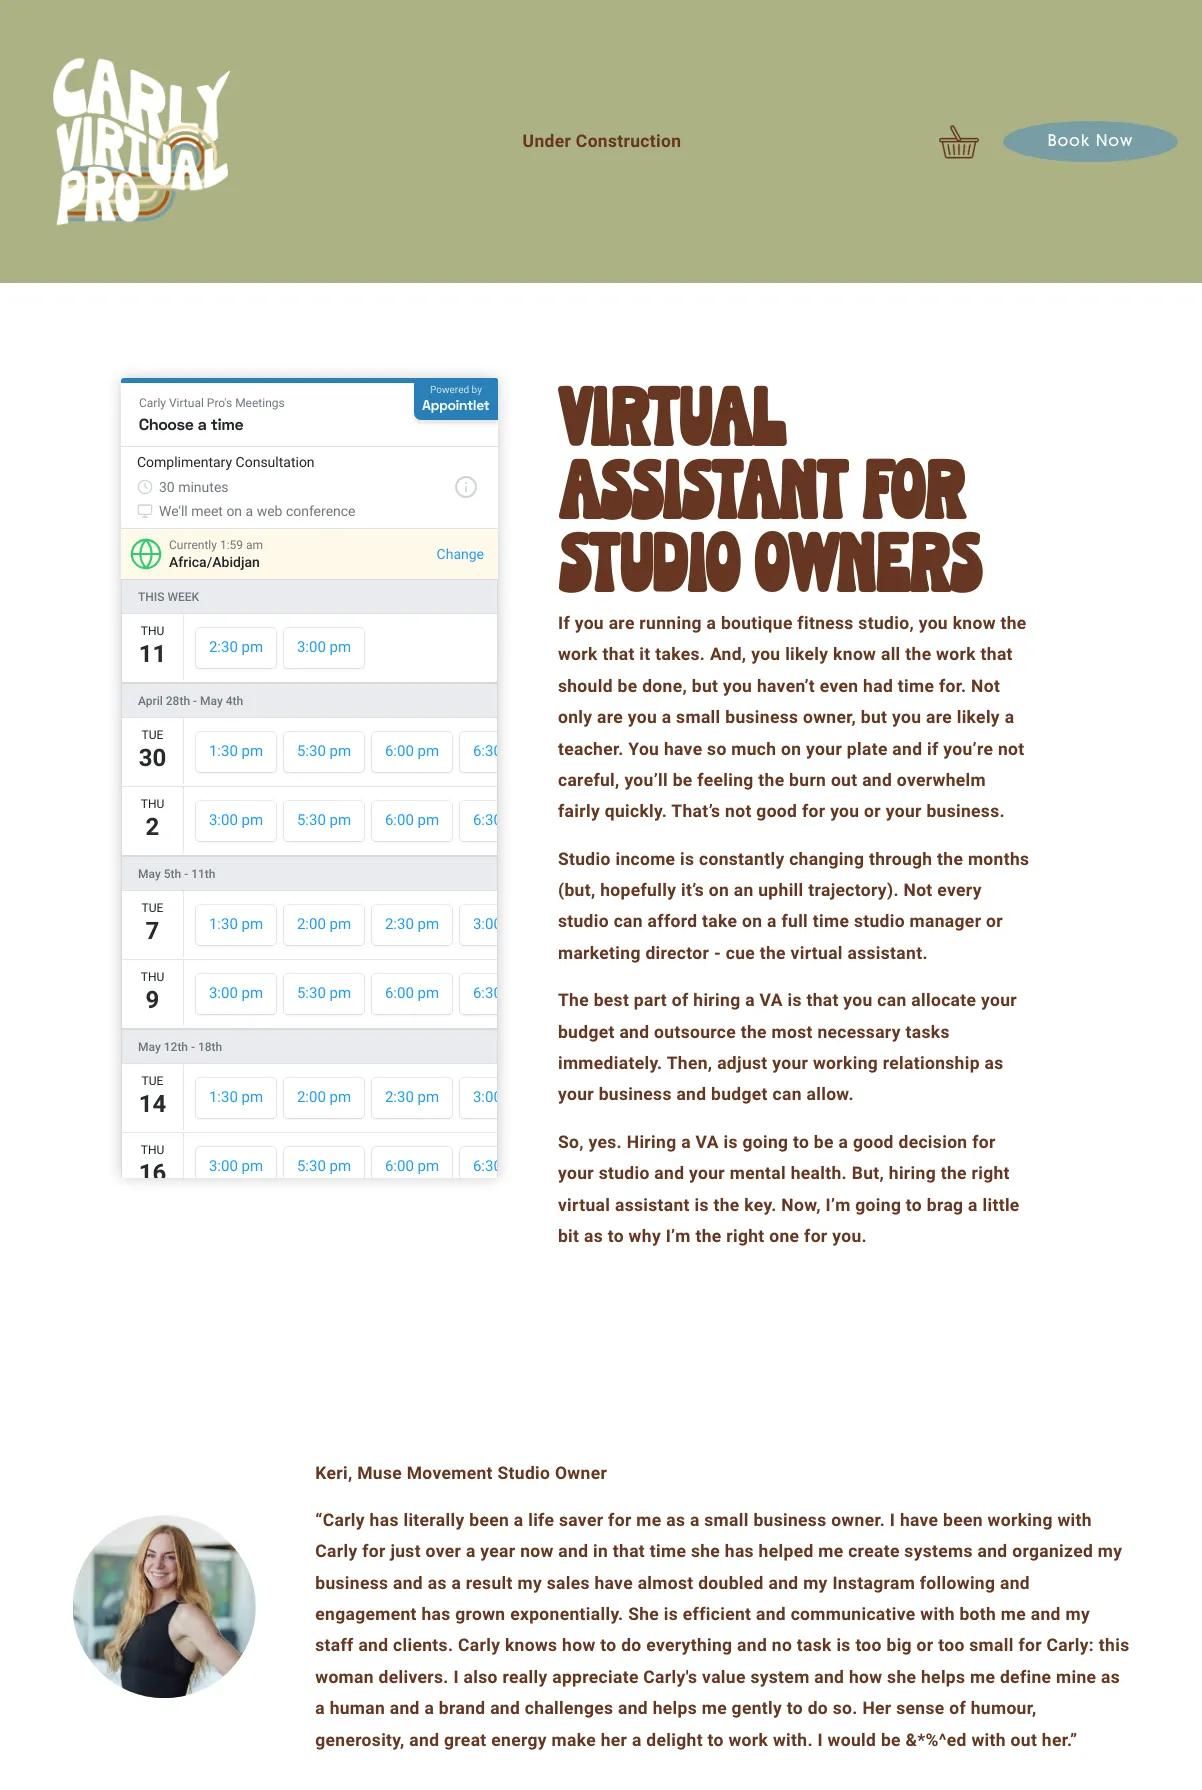 Screenshot 2 of Carly Virtual Pro (Example Squarespace Virtual Assistant Website)